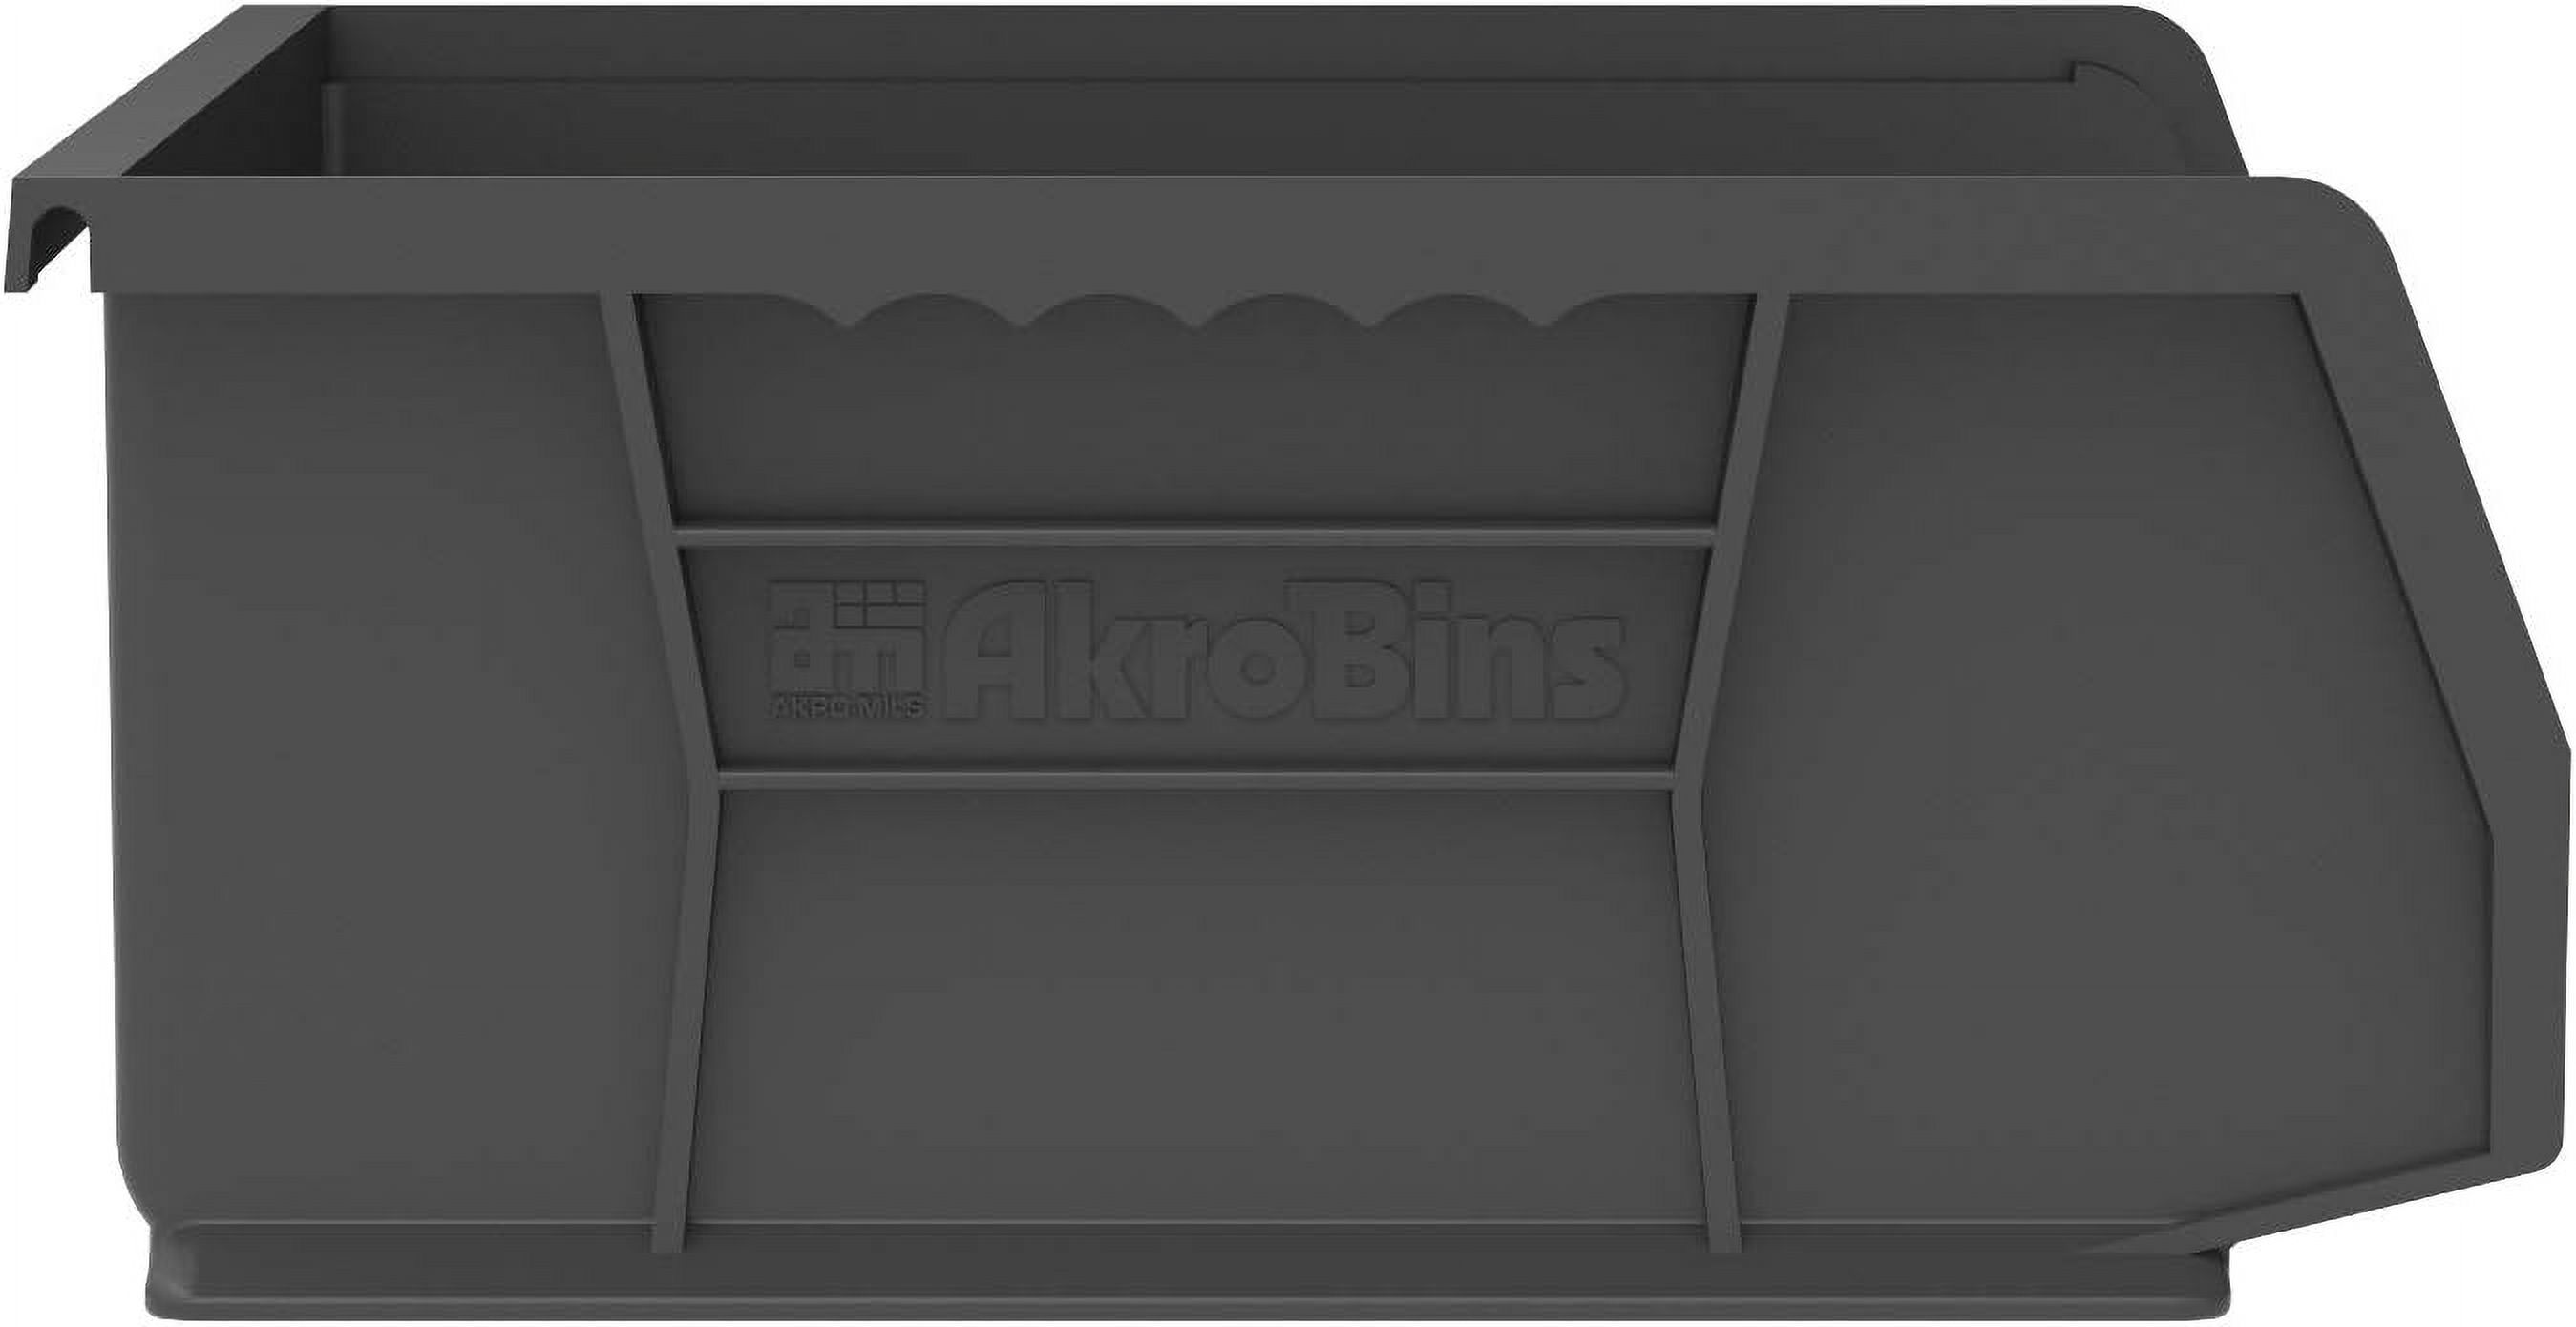 Akro-Mils 6 Pack of 10-7/8 x 16-1/2 x 5" Black AkroBins Plastic Storage Bin Hanging Stacking Containers # 30255BLACK - image 2 of 8